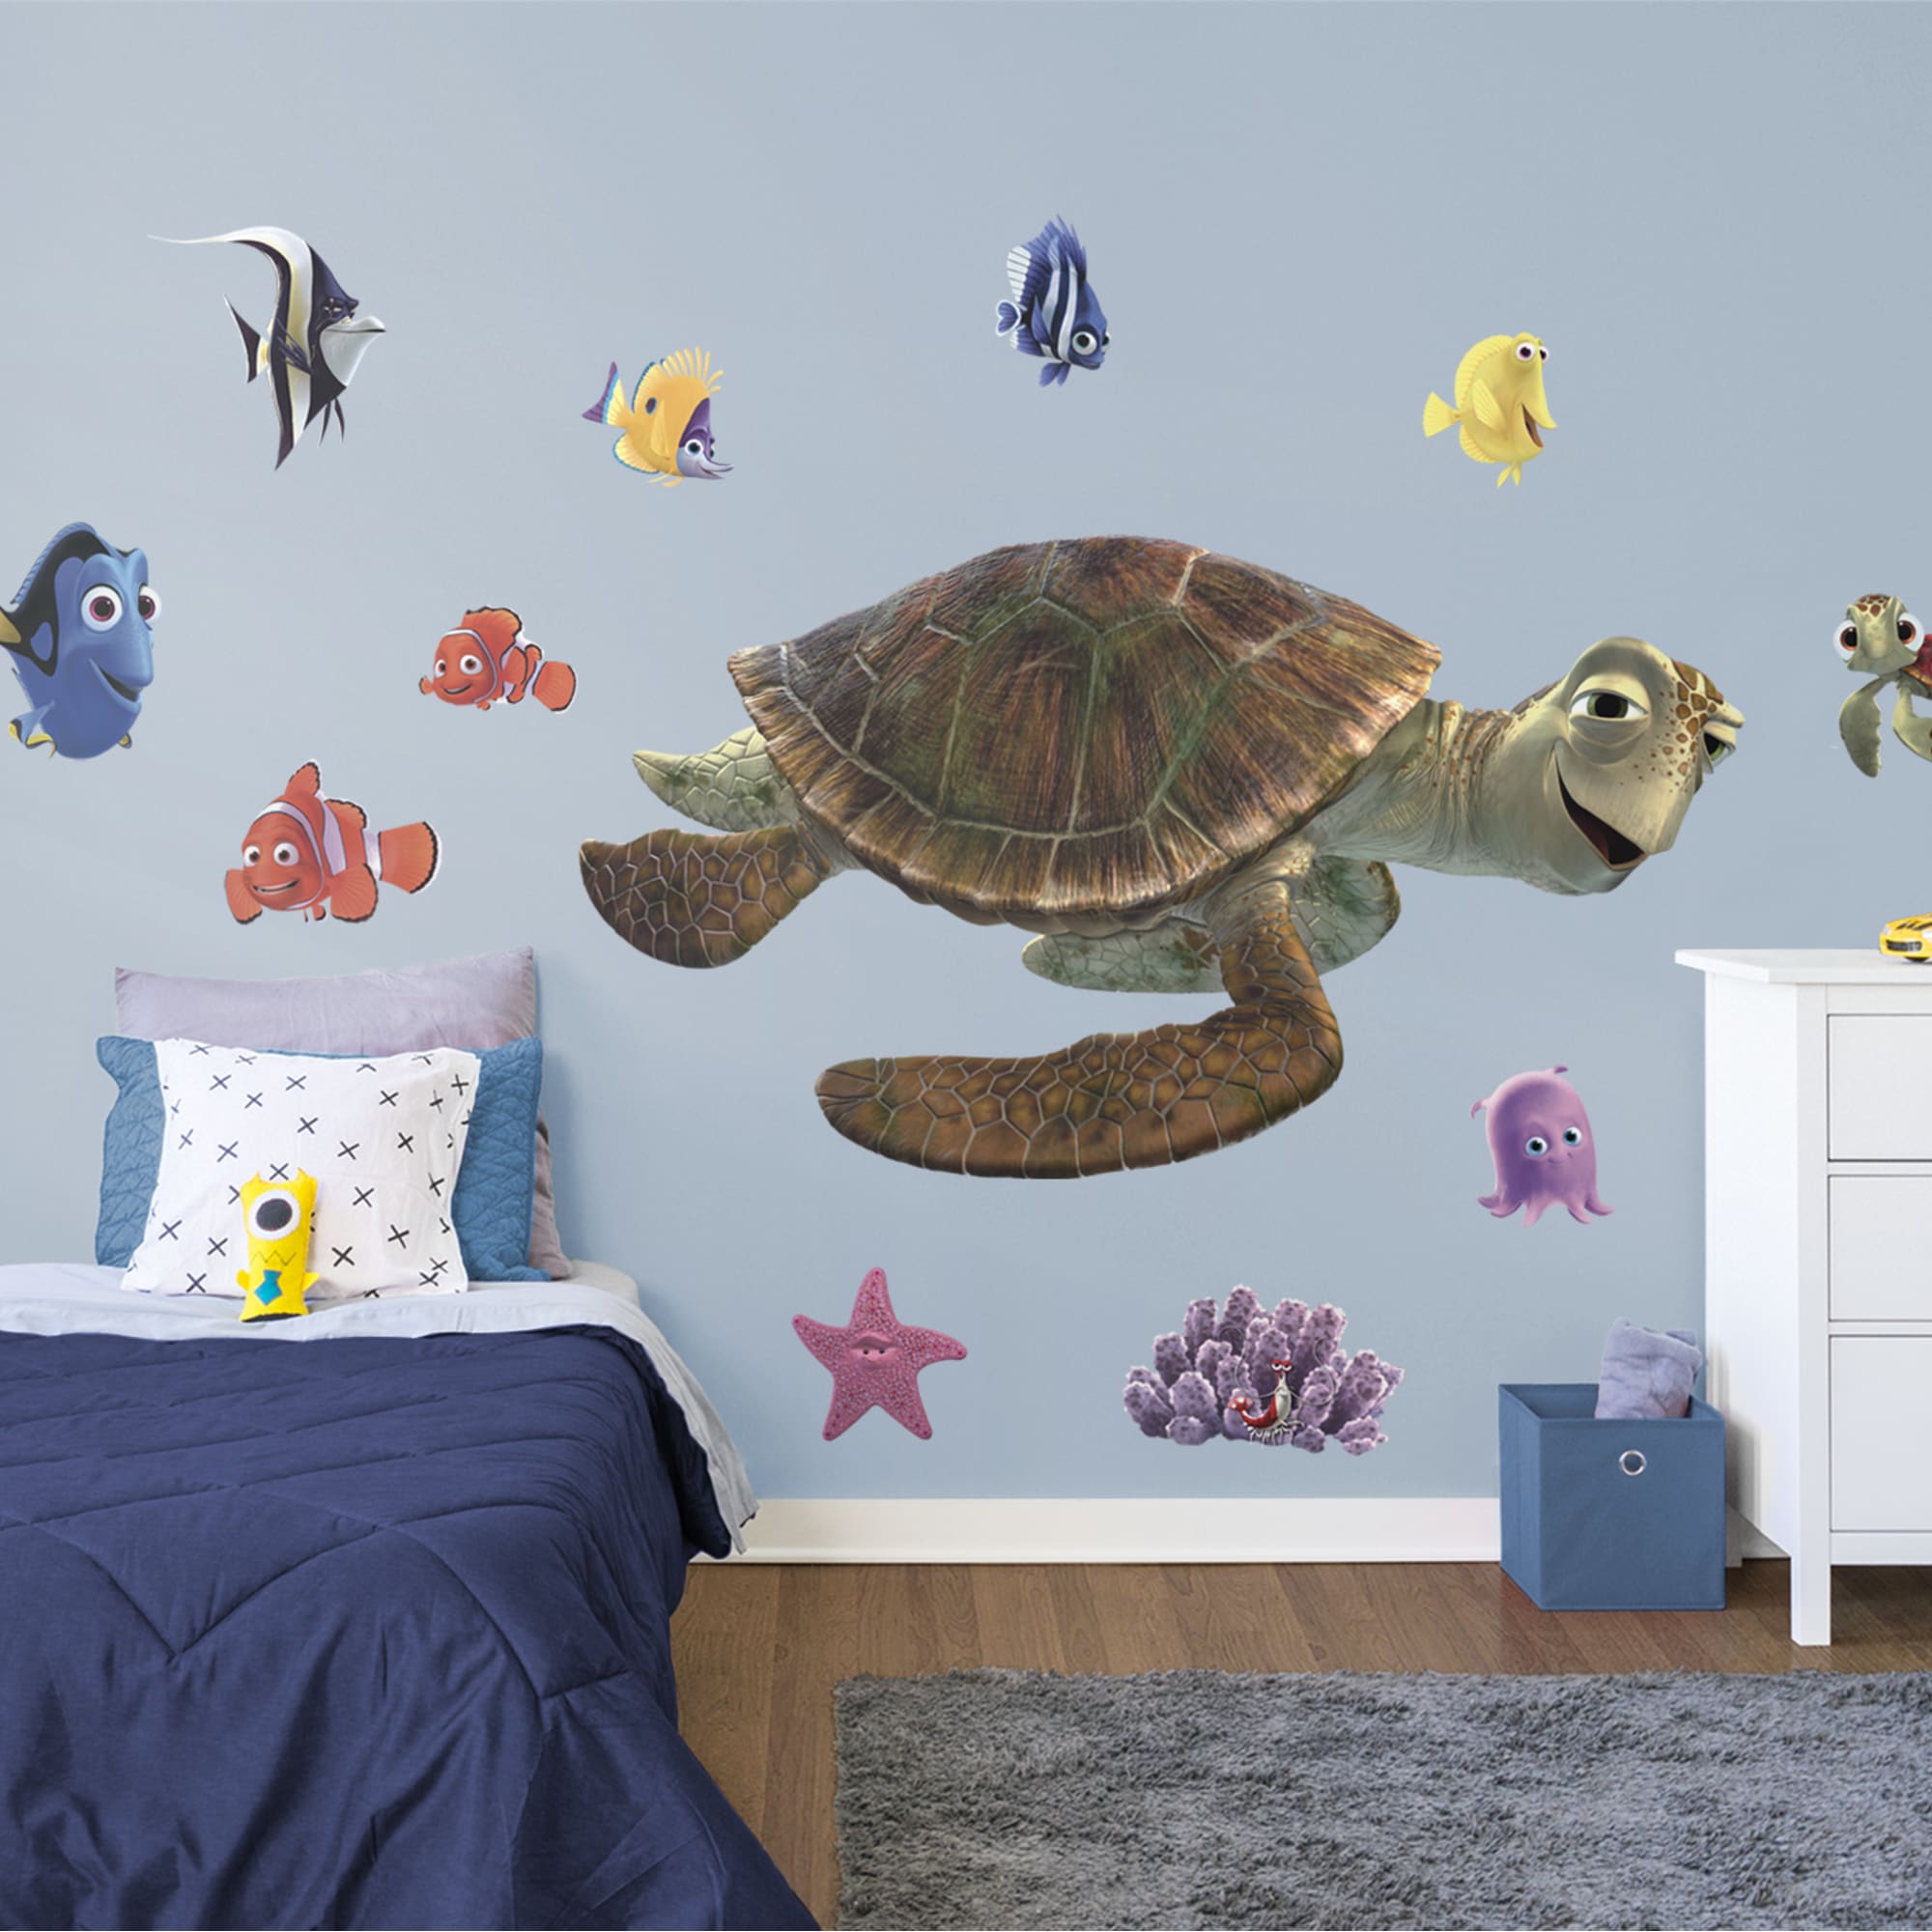 Nemo & Friends: Collection - Officially Licensed Disney/PIXAR Removable Wall Decals 79.0"W x 49.5"H by Fathead | Vinyl